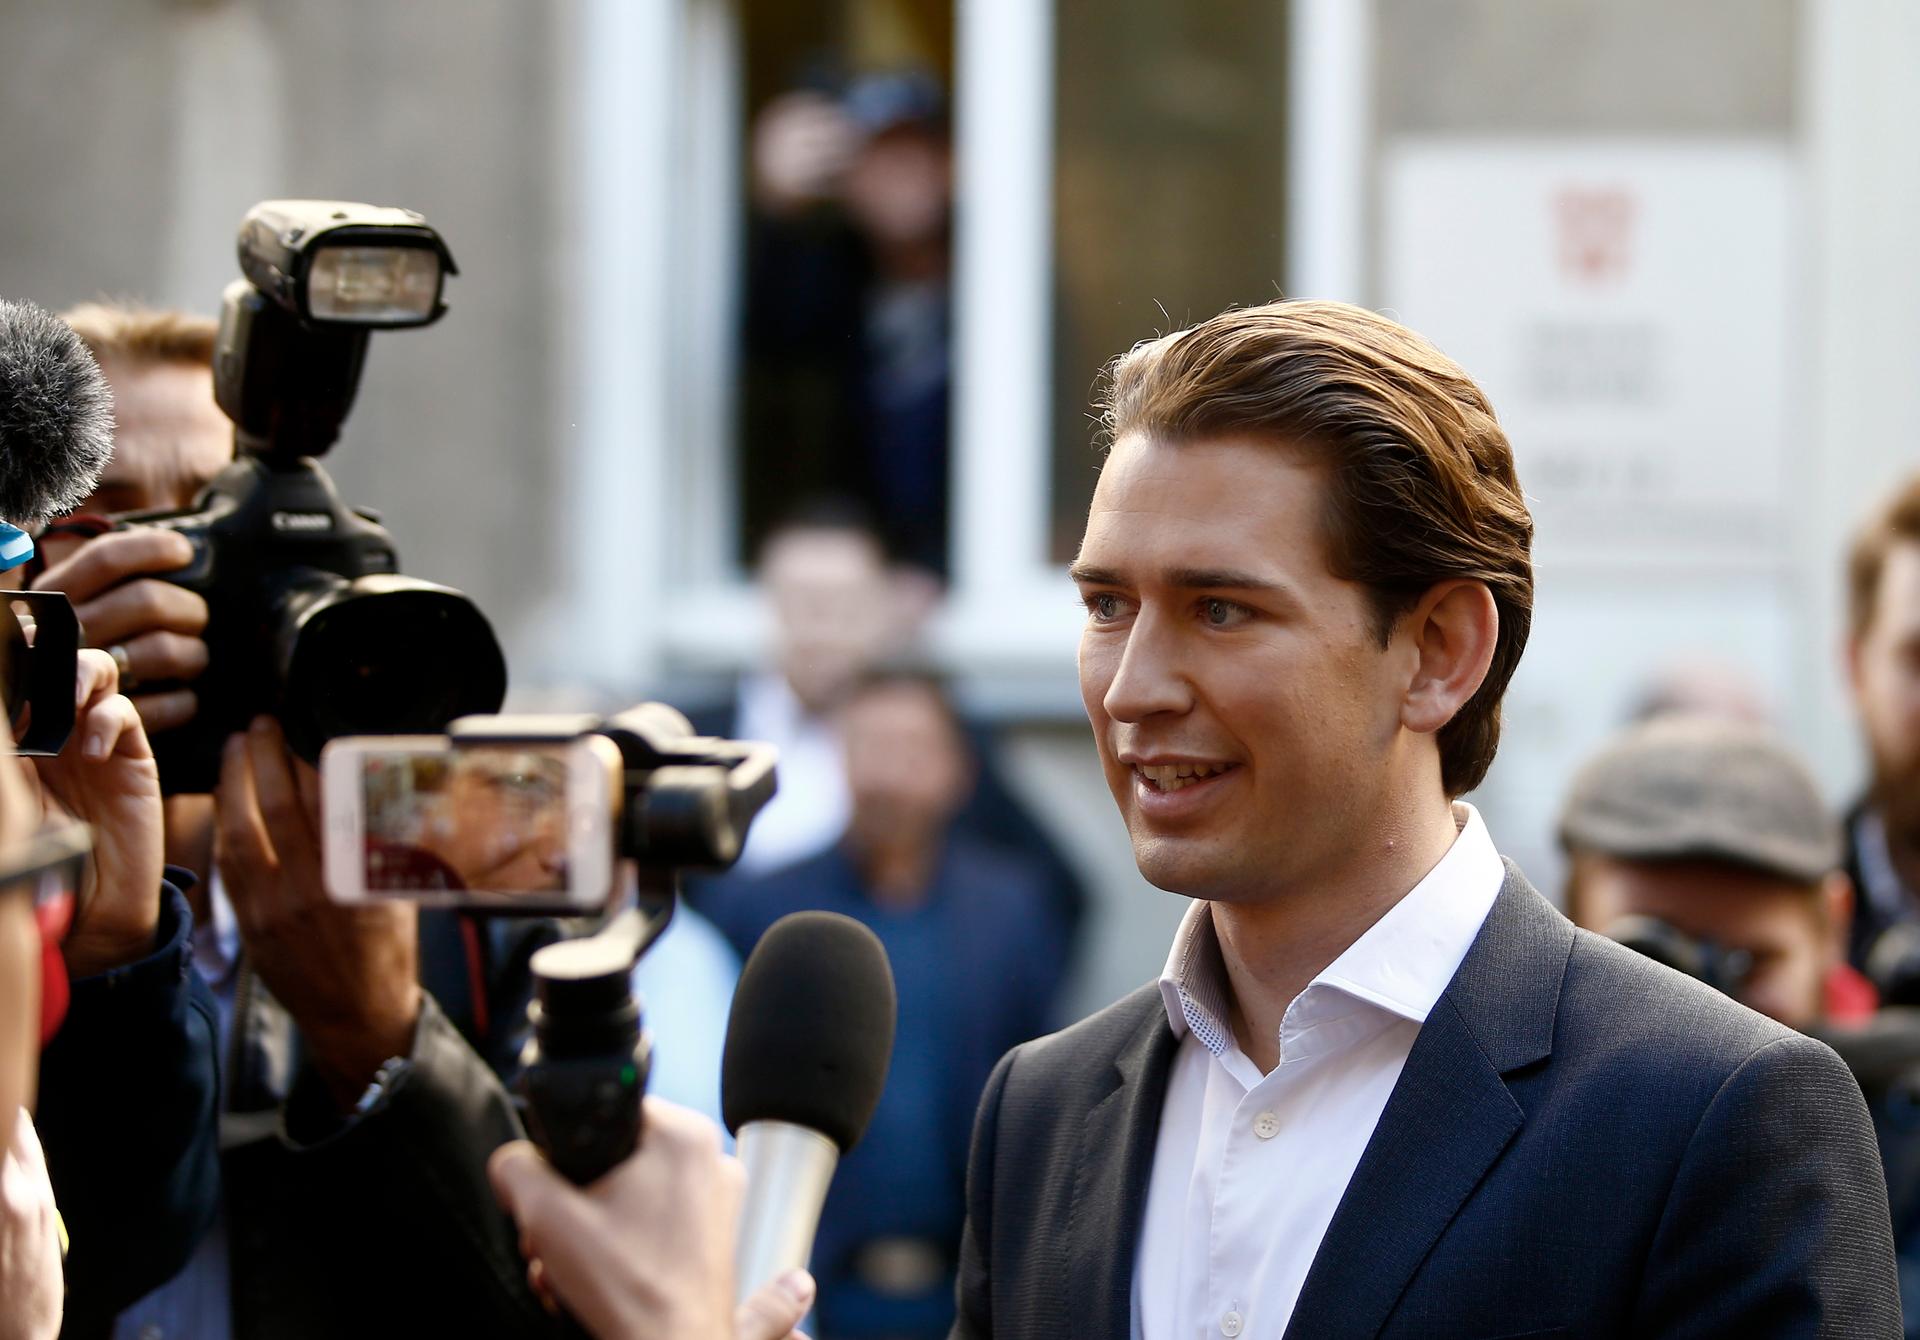 People's Party candidate Sebastan Kurz at a polling station in Vienna, Austria, on Oct. 15, 2017.